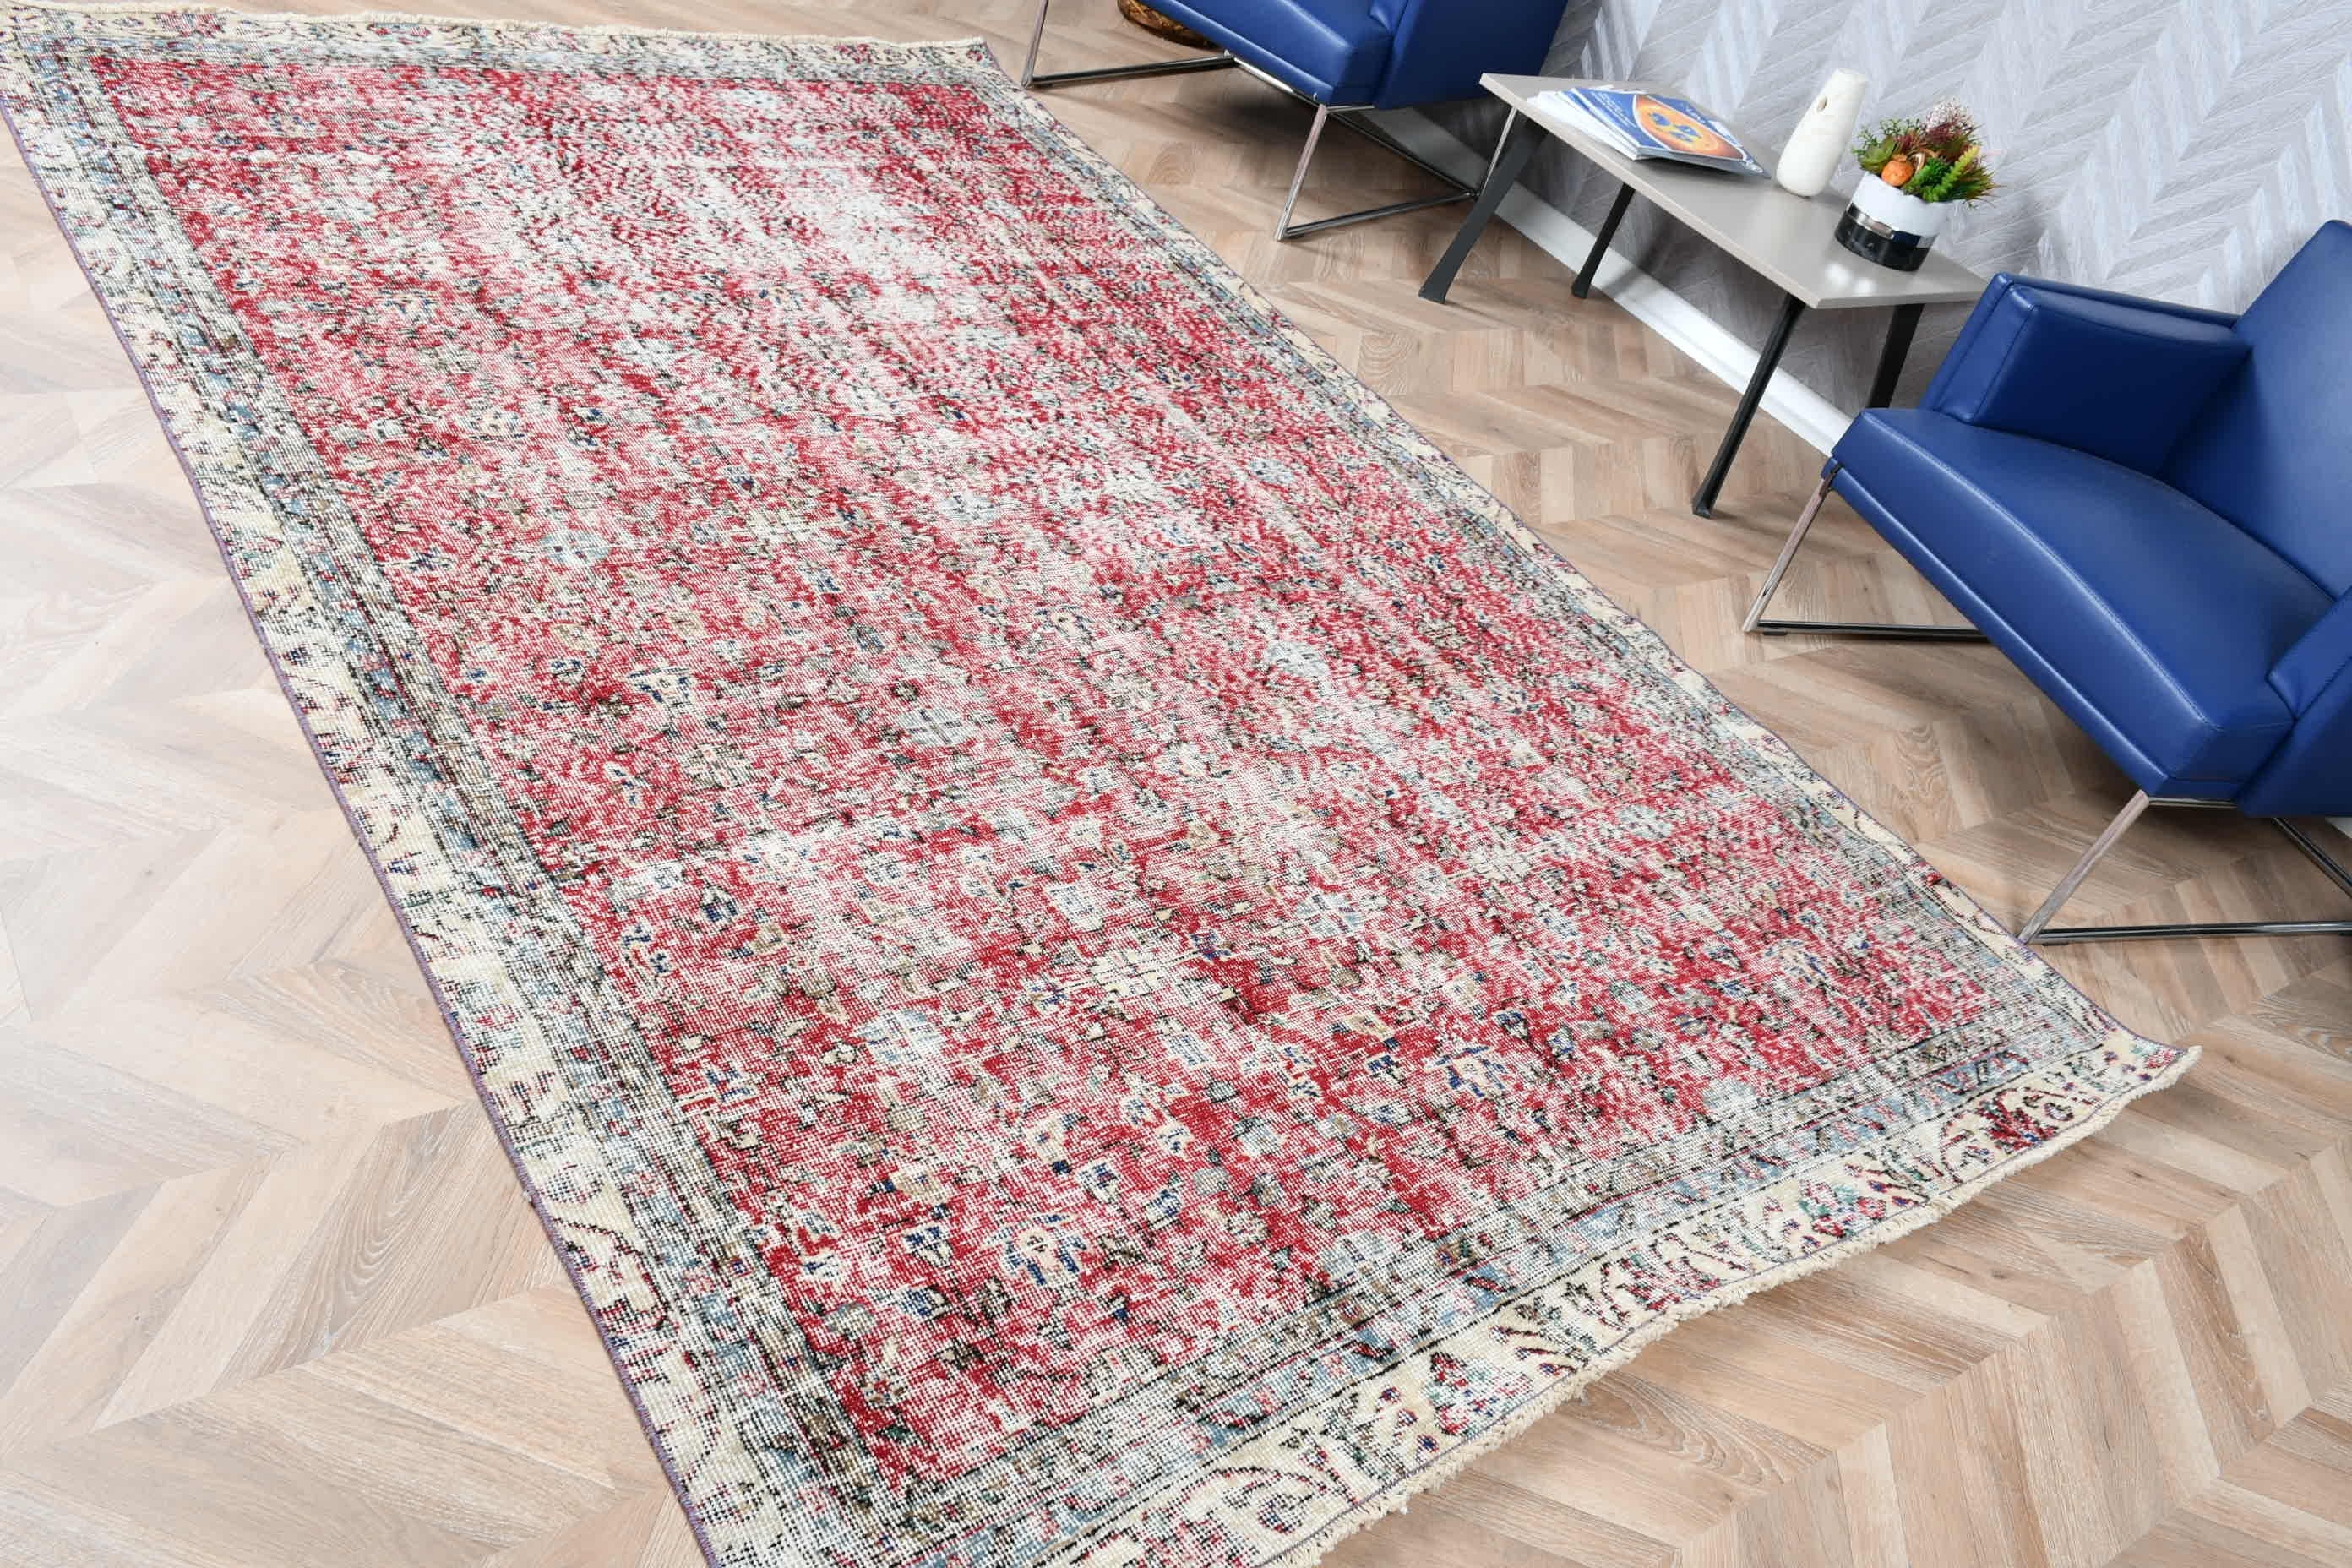 Antique Rugs, Kitchen Rug, Ethnic Rug, 5.9x9.4 ft Large Rugs, Salon Rug, Turkish Rug, Red Anatolian Rugs, Living Room Rugs, Vintage Rugs